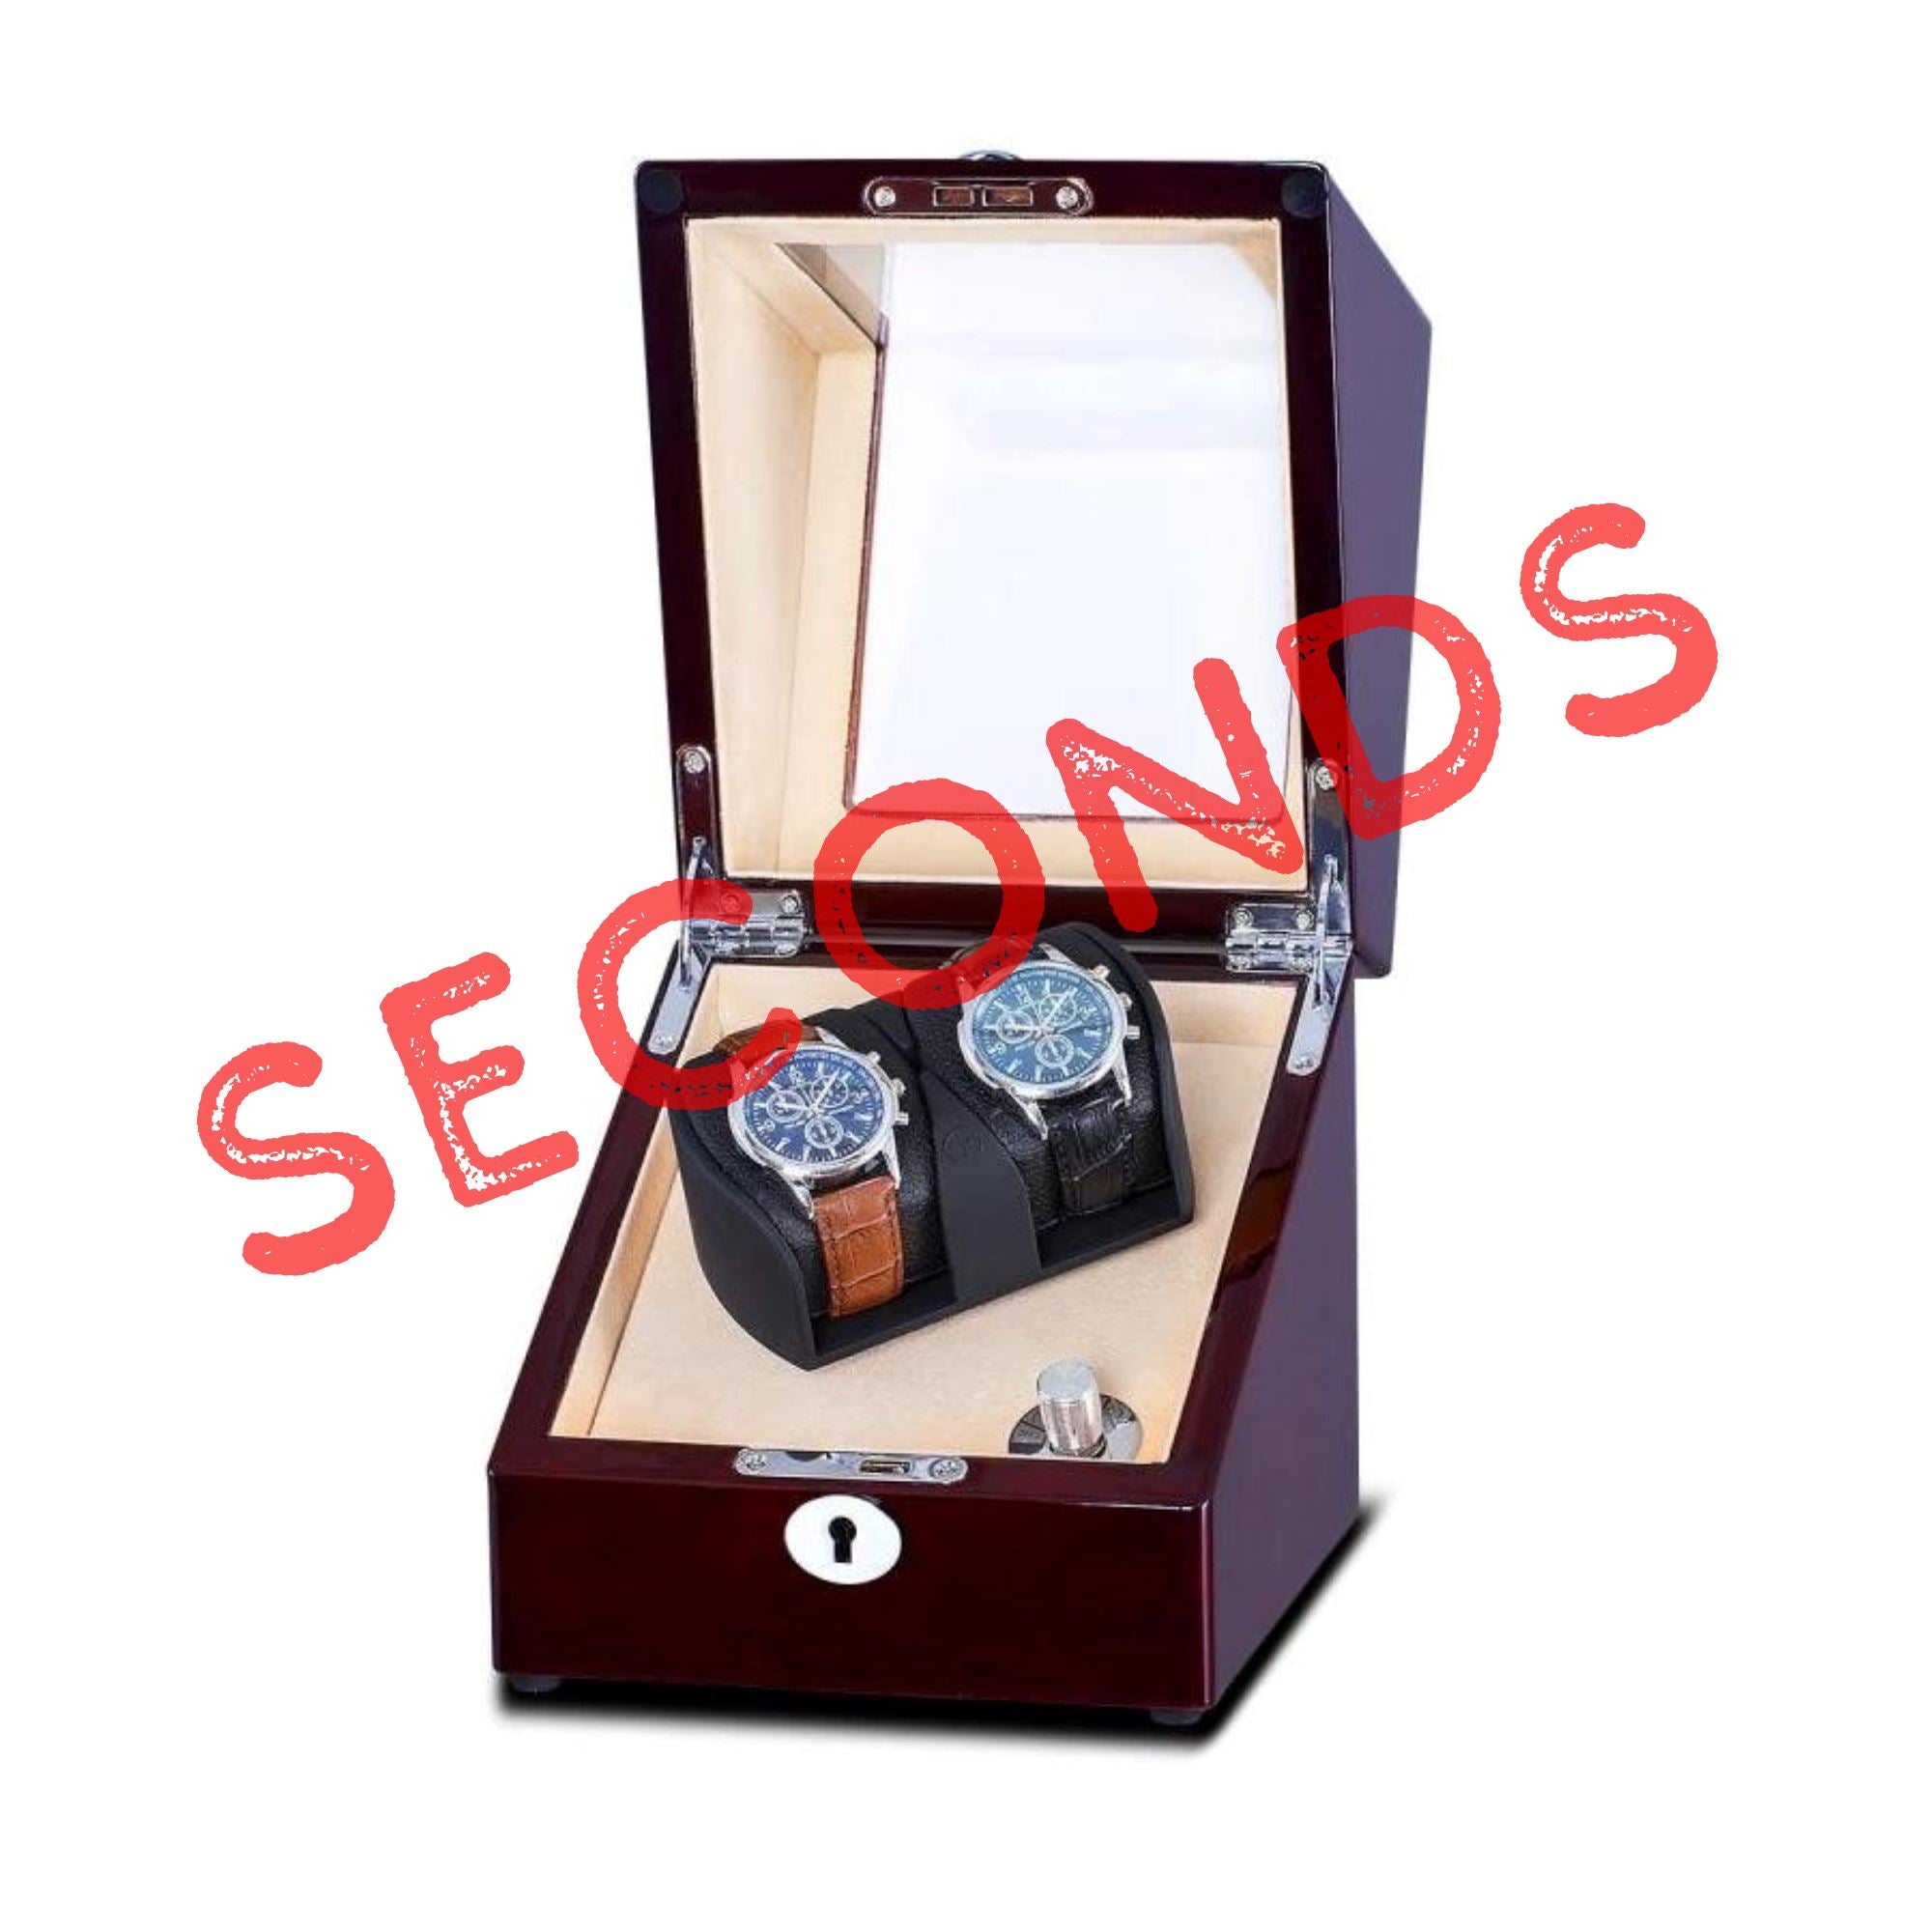 Seconds - Lindeman Mahogany Watch Winder Box for 2 Watches (Single Rotor) (a) Seconds Clinks 